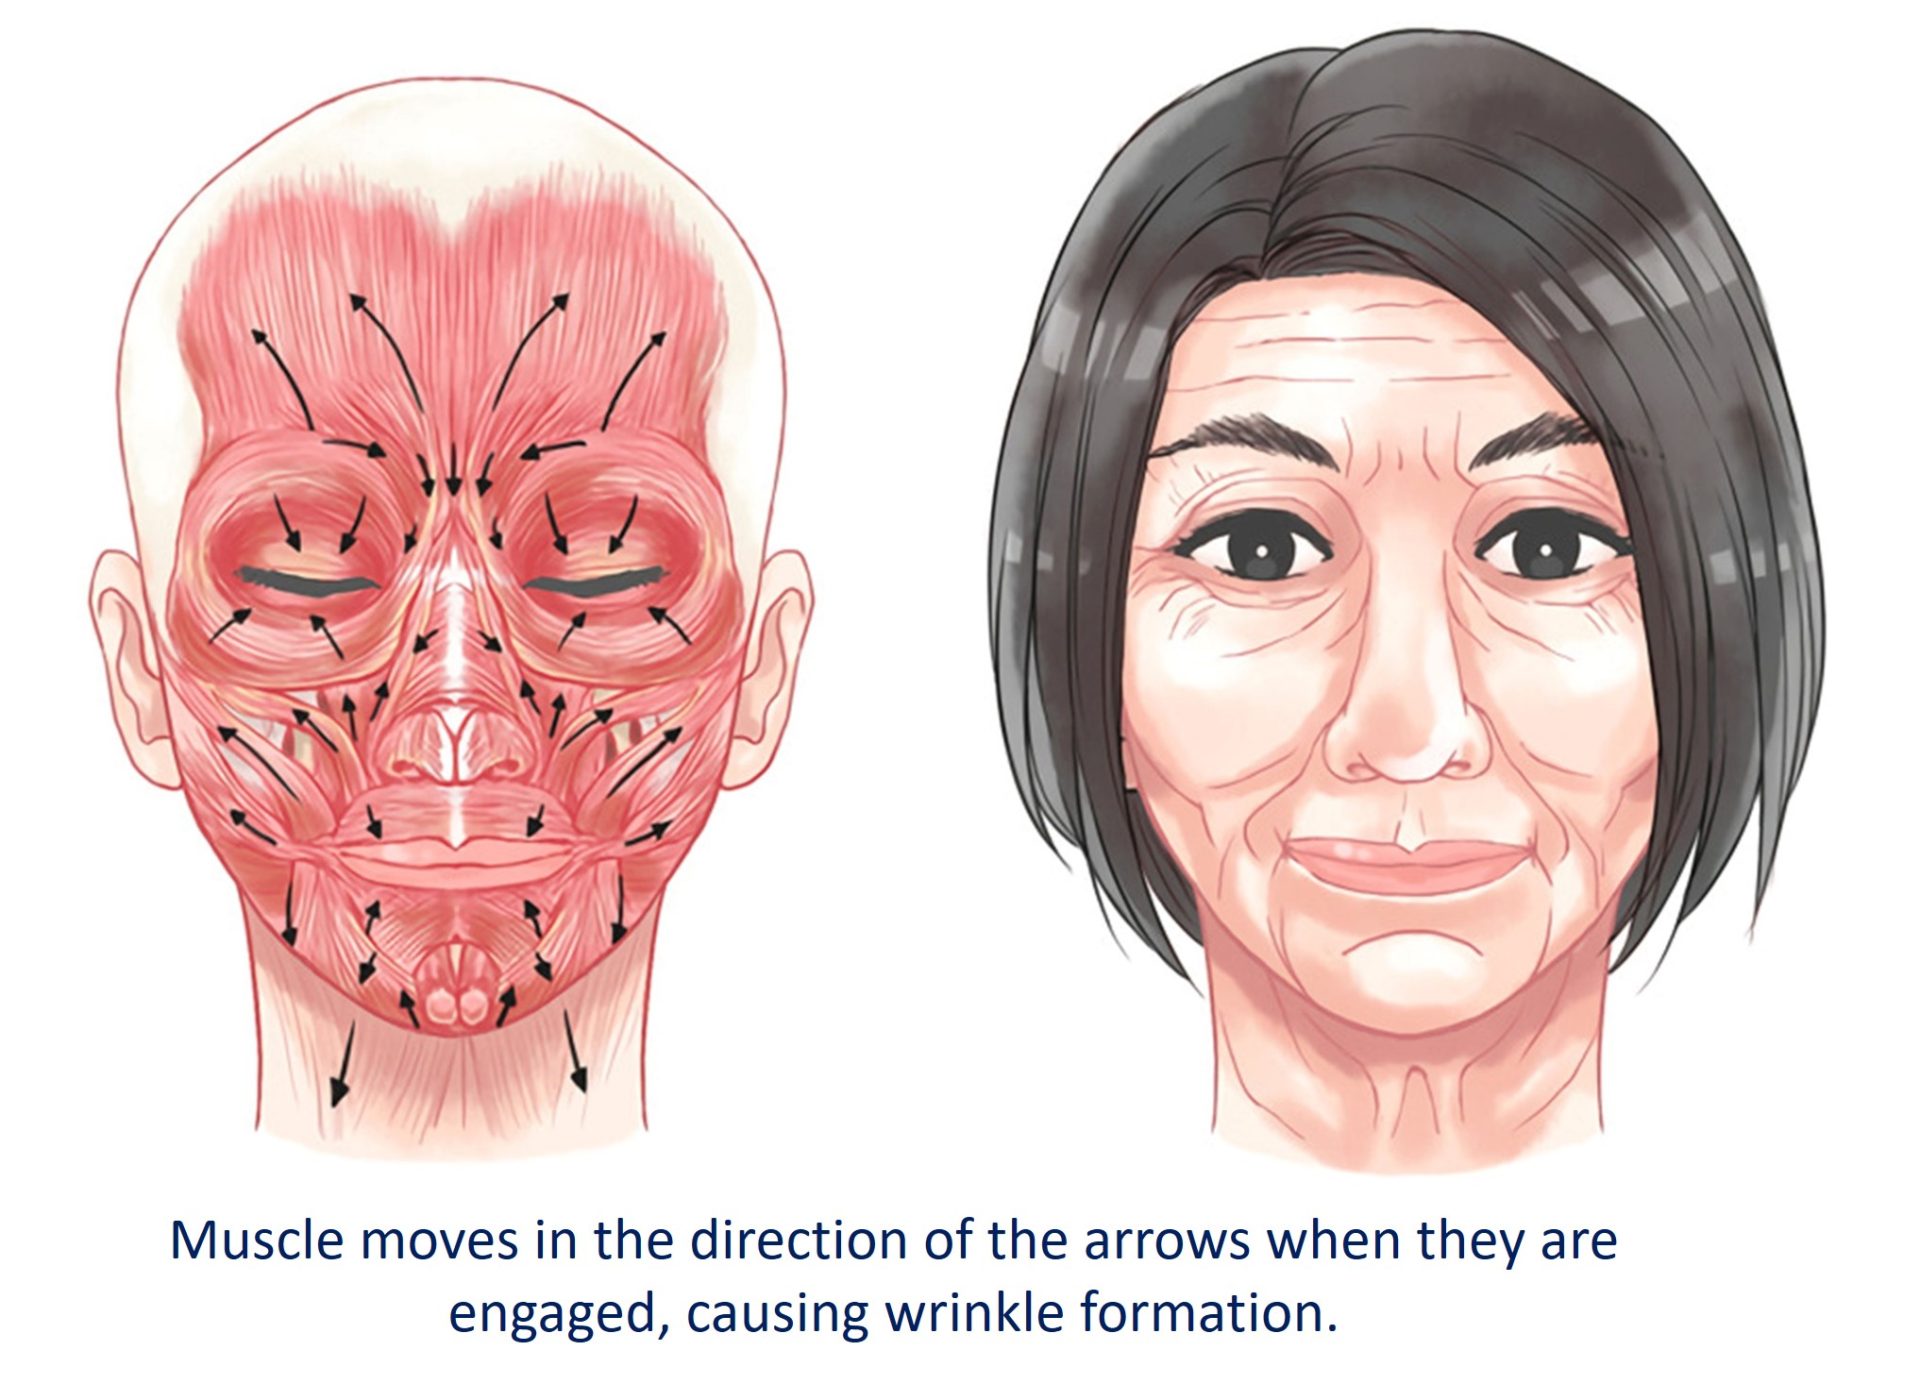 facial muscle movements and wrinkle formation